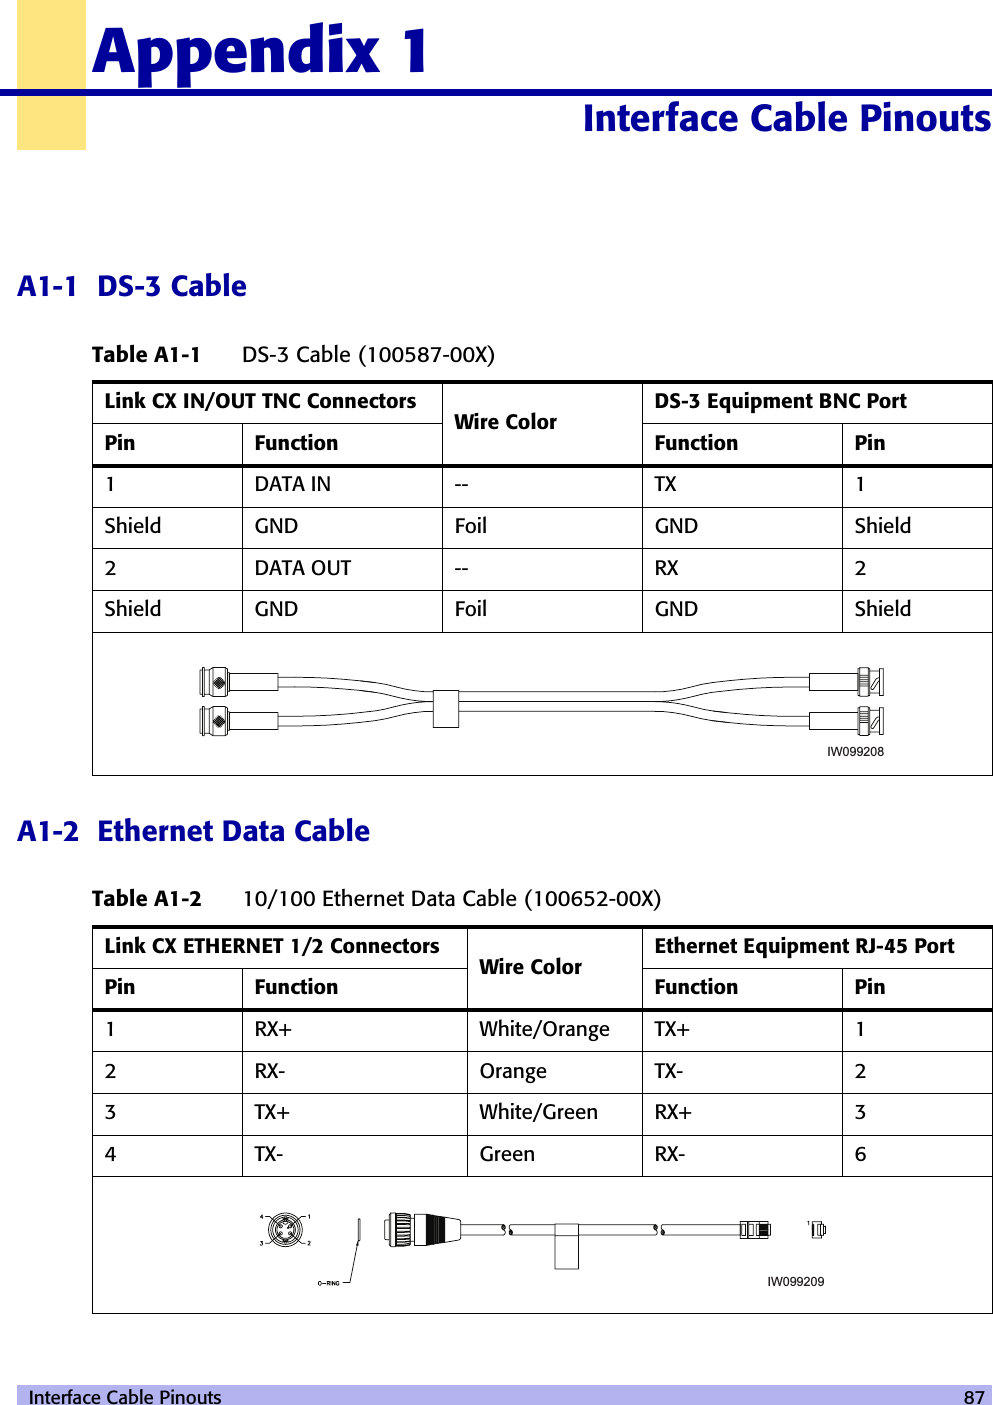  Interface Cable Pinouts 87Appendix 1Interface Cable Pinouts 10000A1-1  DS-3 CableA1-2  Ethernet Data CableTable A1-1 DS-3 Cable (100587-00X)Link CX IN/OUT TNC Connectors Wire Color DS-3 Equipment BNC PortPin Function Function Pin1 DATA IN -- TX 1Shield GND Foil GND Shield2 DATA OUT -- RX 2Shield GND Foil GND ShieldTable A1-2 10/100 Ethernet Data Cable (100652-00X)Link CX ETHERNET 1/2 Connectors Wire Color Ethernet Equipment RJ-45 PortPin Function Function Pin1 RX+ White/Orange TX+ 12 RX- Orange TX- 23 TX+ White/Green RX+ 34 TX- Green RX- 6IW099208IW099209